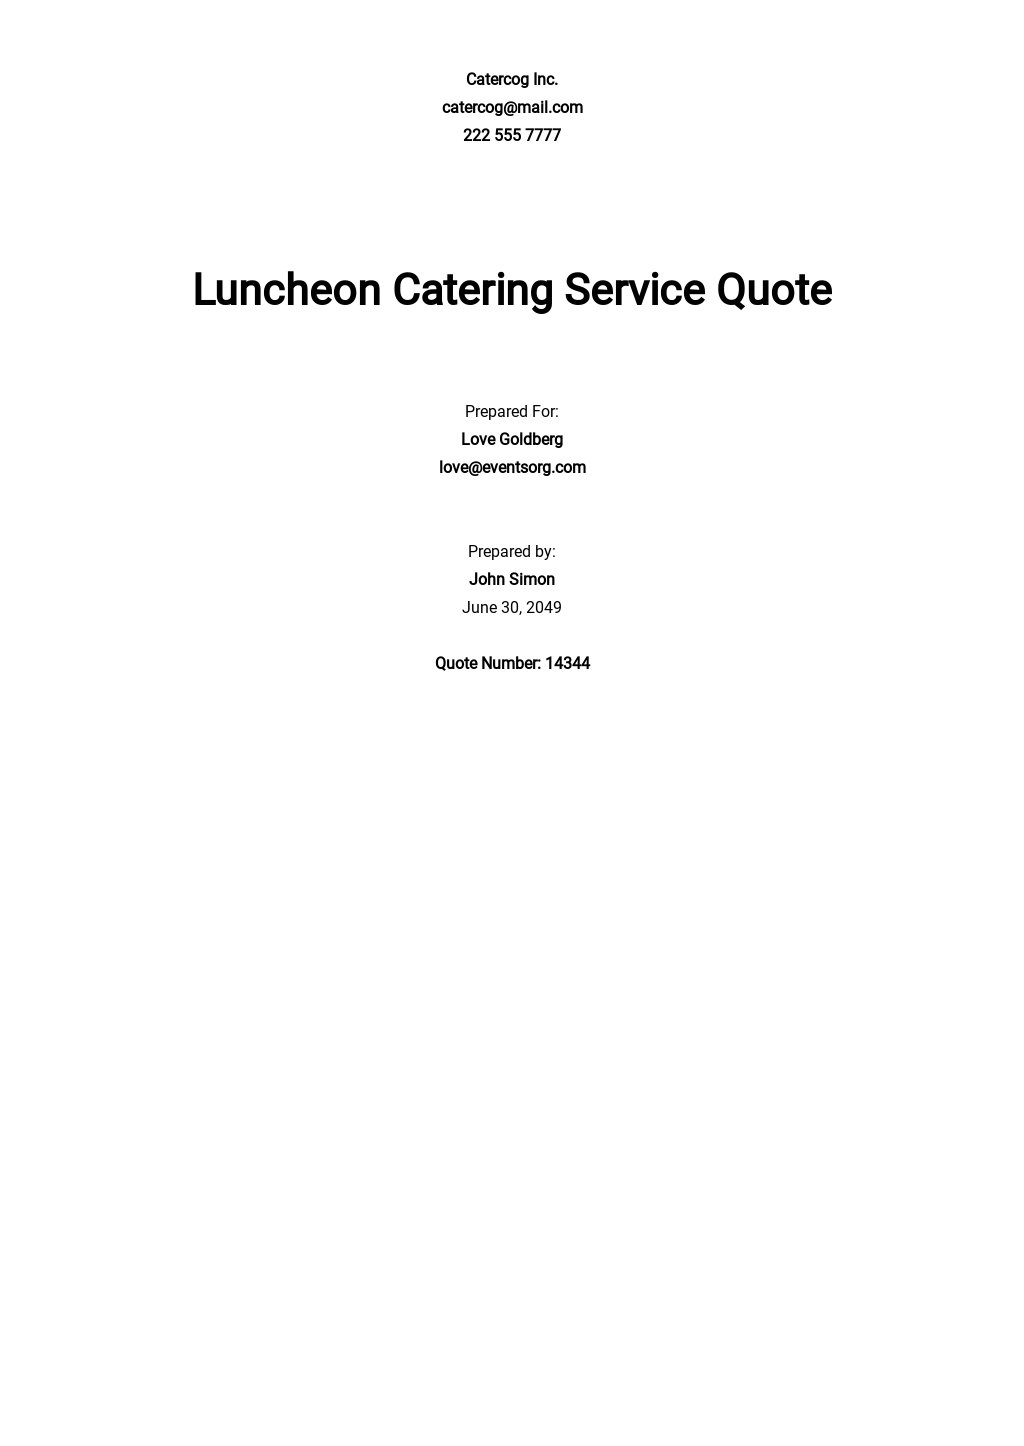 Request for Quotation for Catering Services Template.jpe